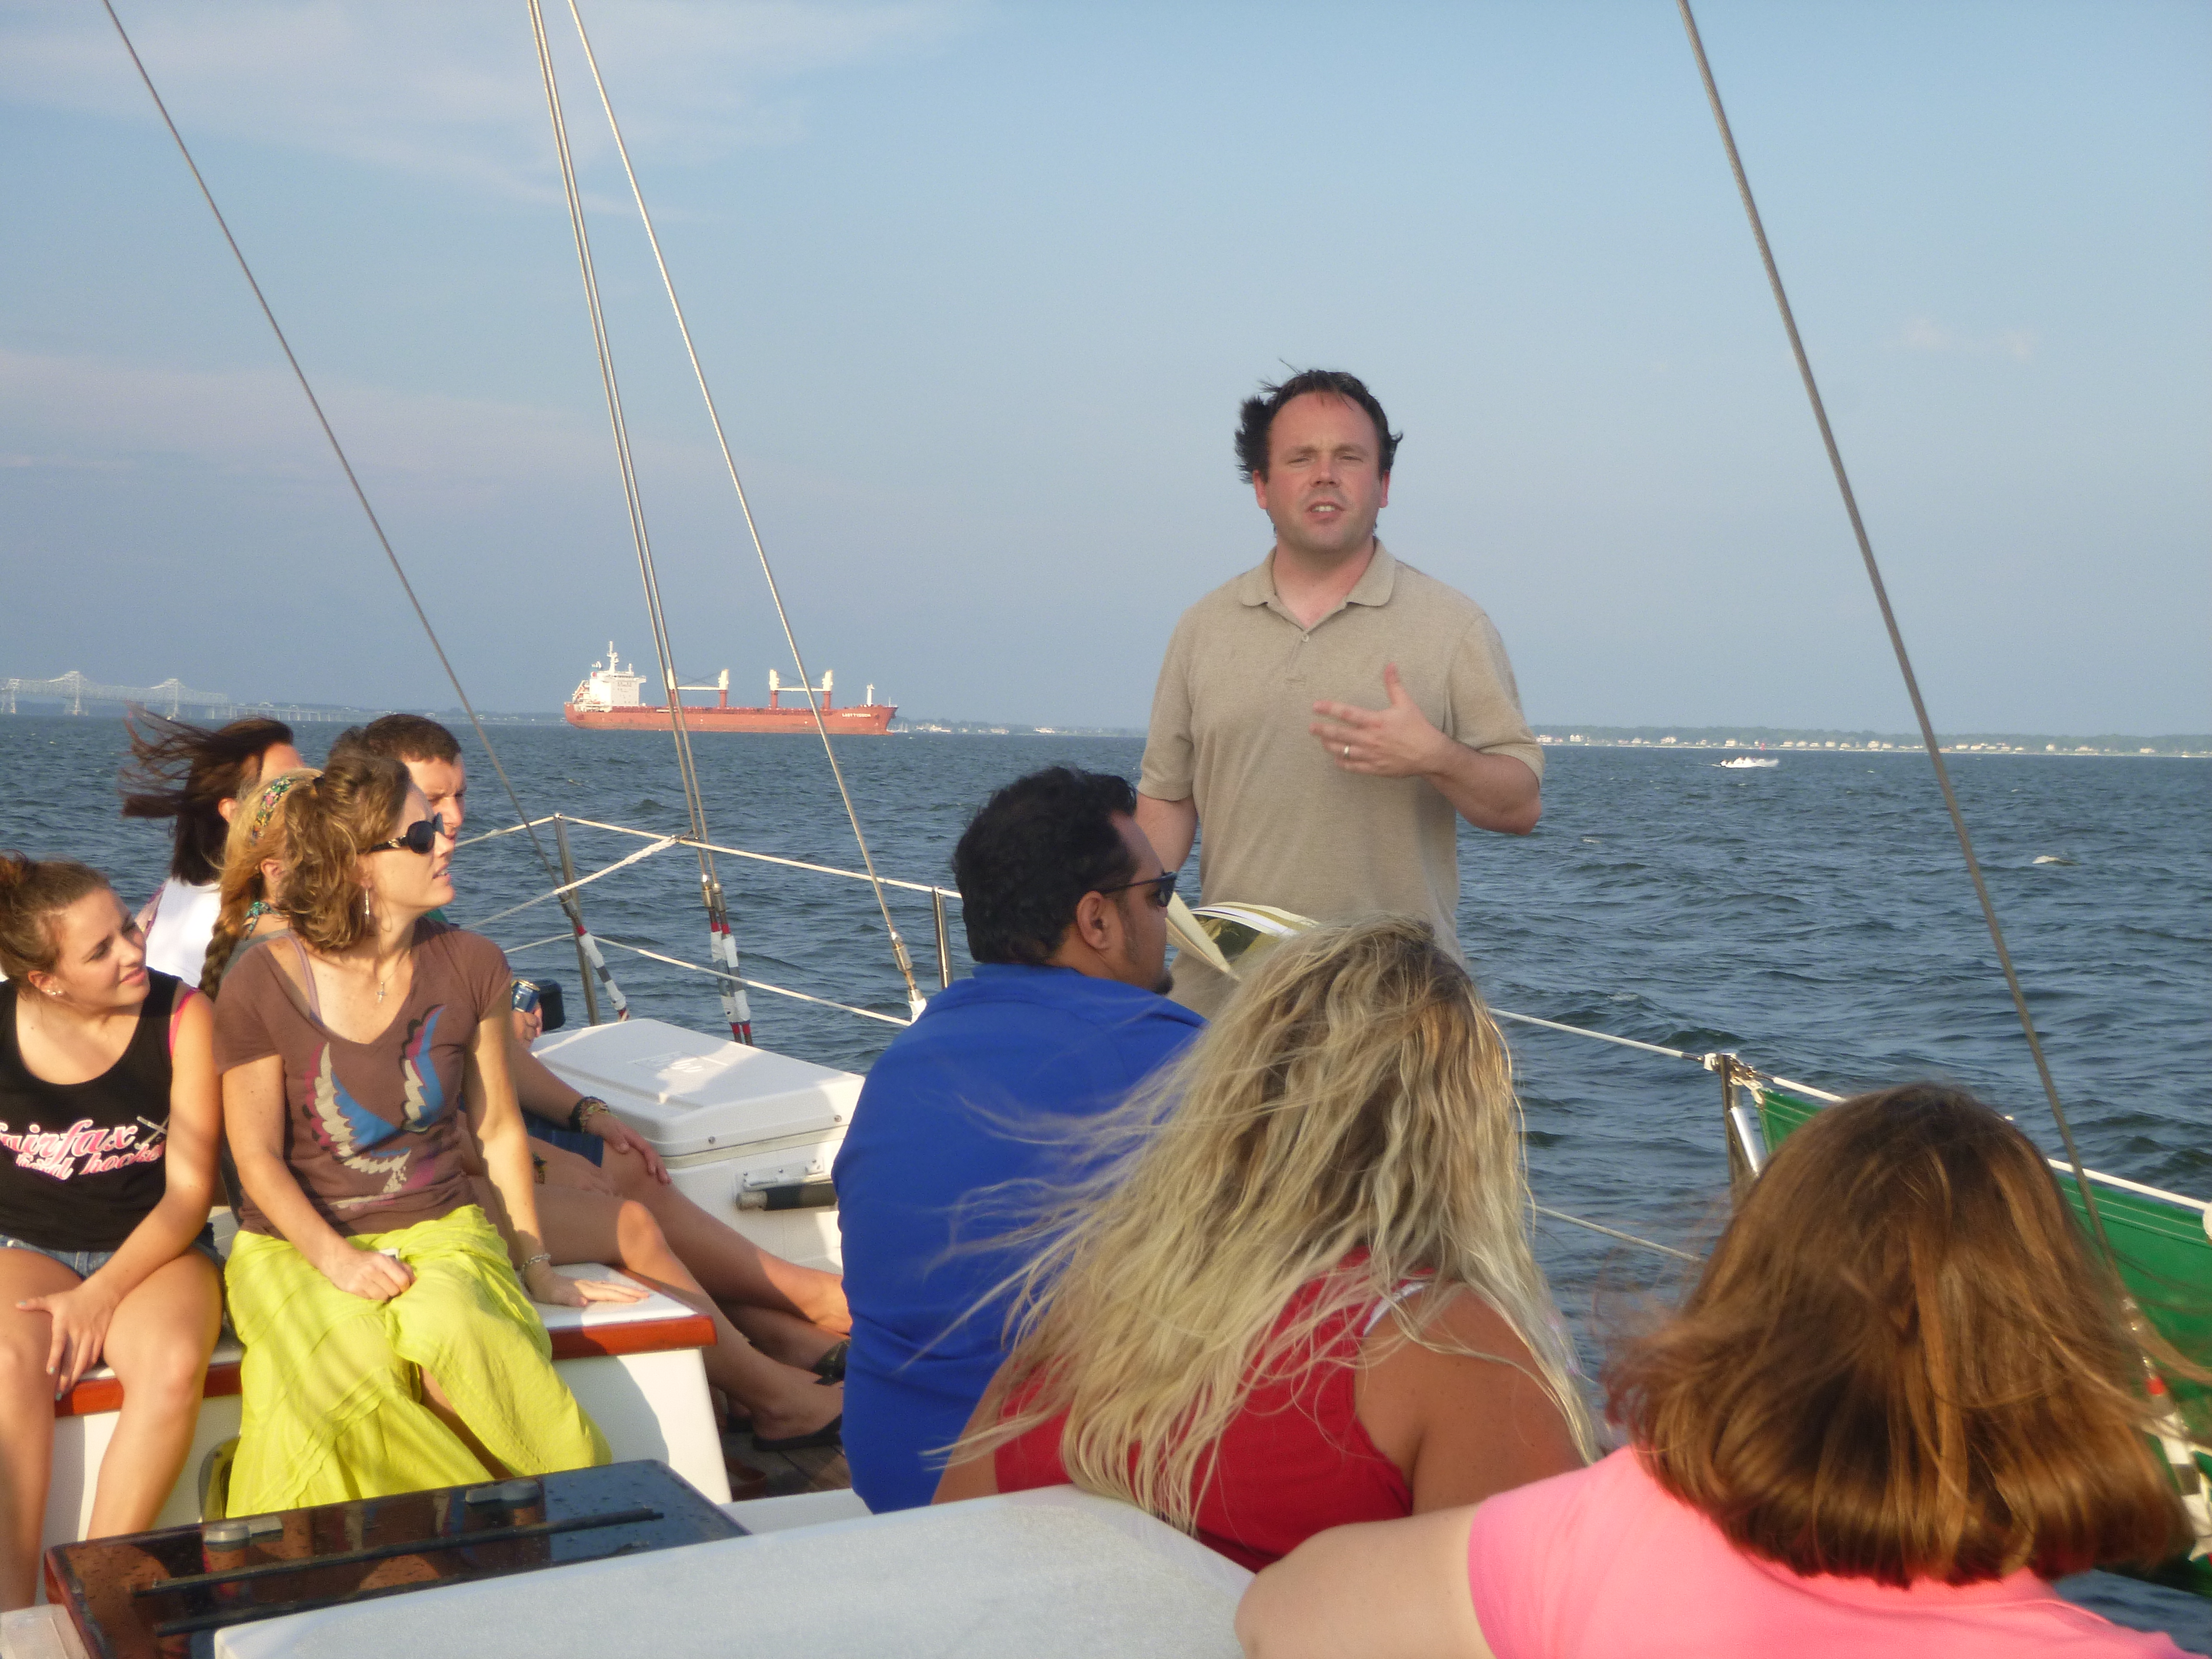 Rod Cofield from Historic Annapolis telling a story on the schooner